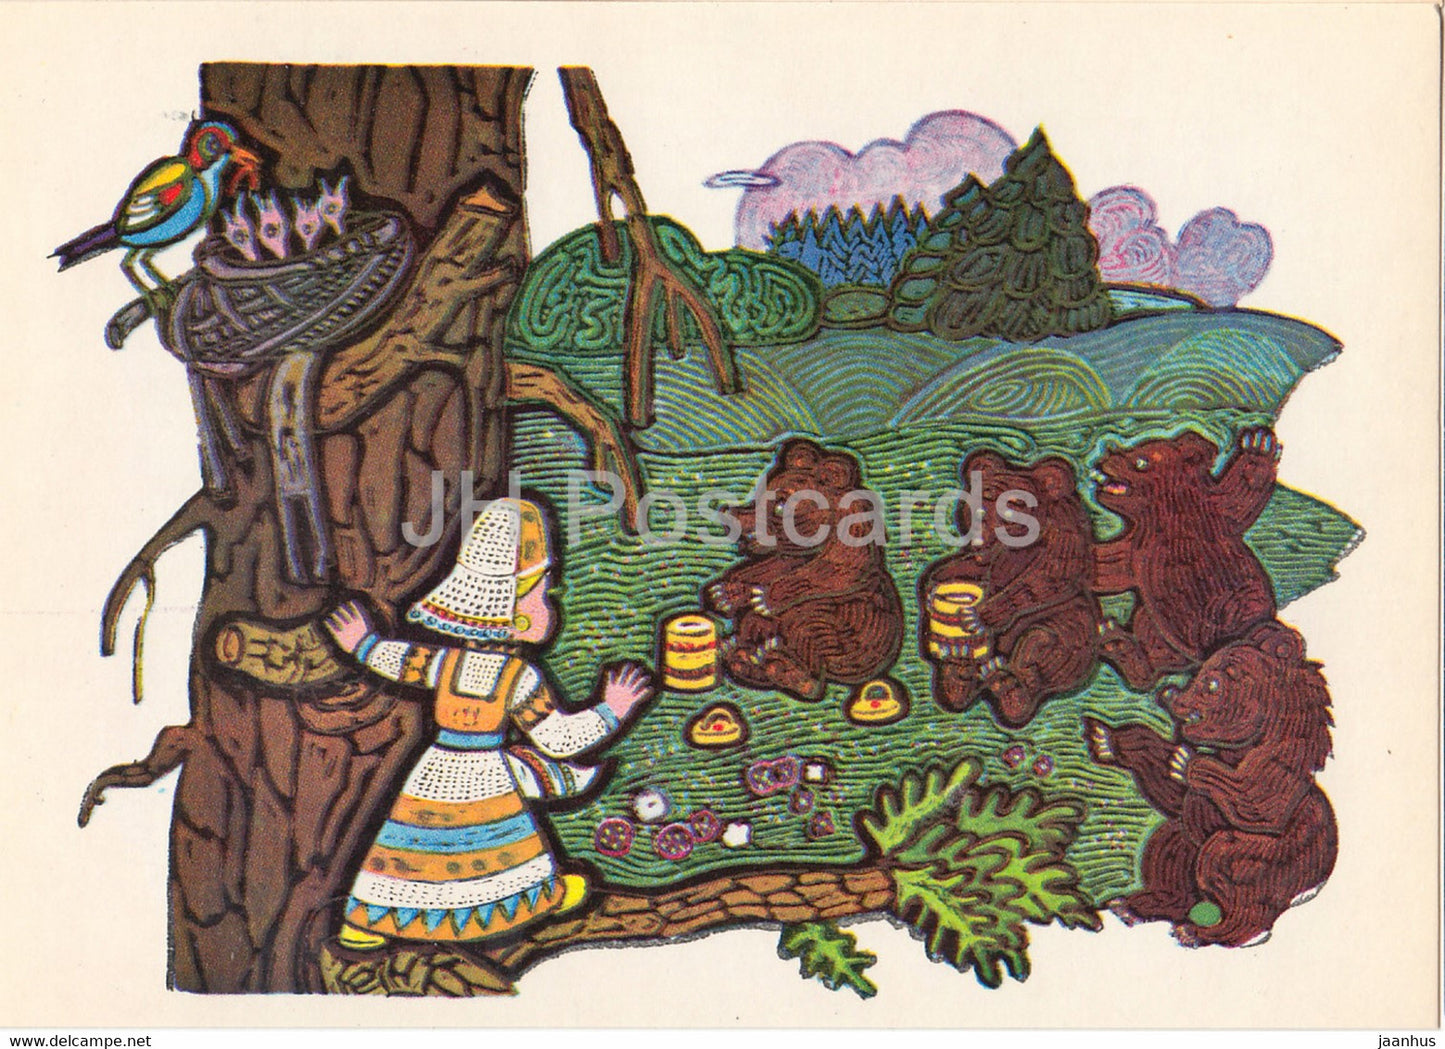 illustration by V. Ignatov - Girl with a spindle - bears - Komi fairy tale - 1977 - Russia USSR - unused - JH Postcards